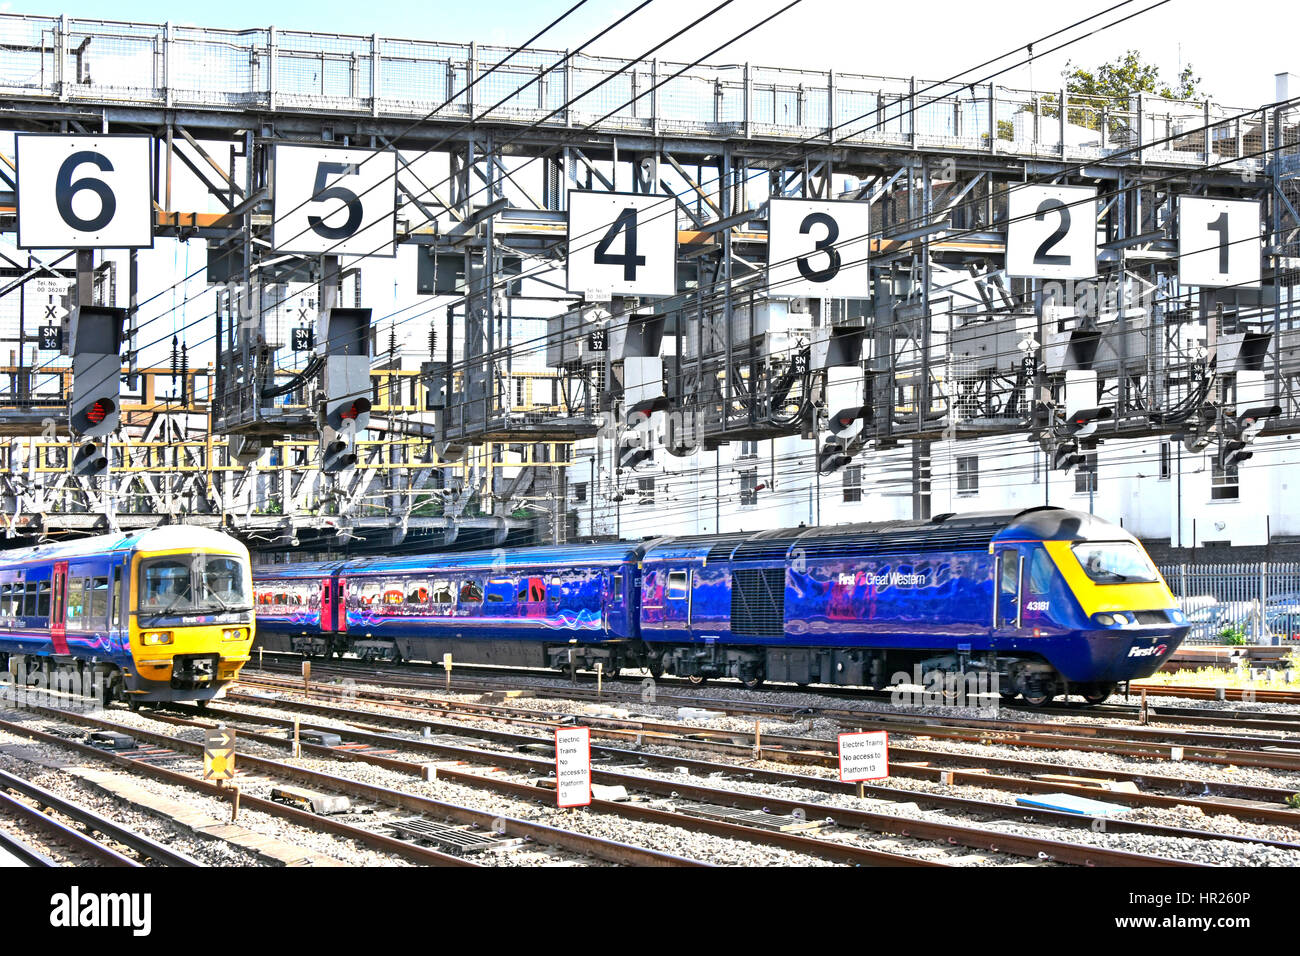 Two Firstgroup First Great Western uk train just departed Paddington railway station London UK passing under large signal gantry oversized numbers Stock Photo